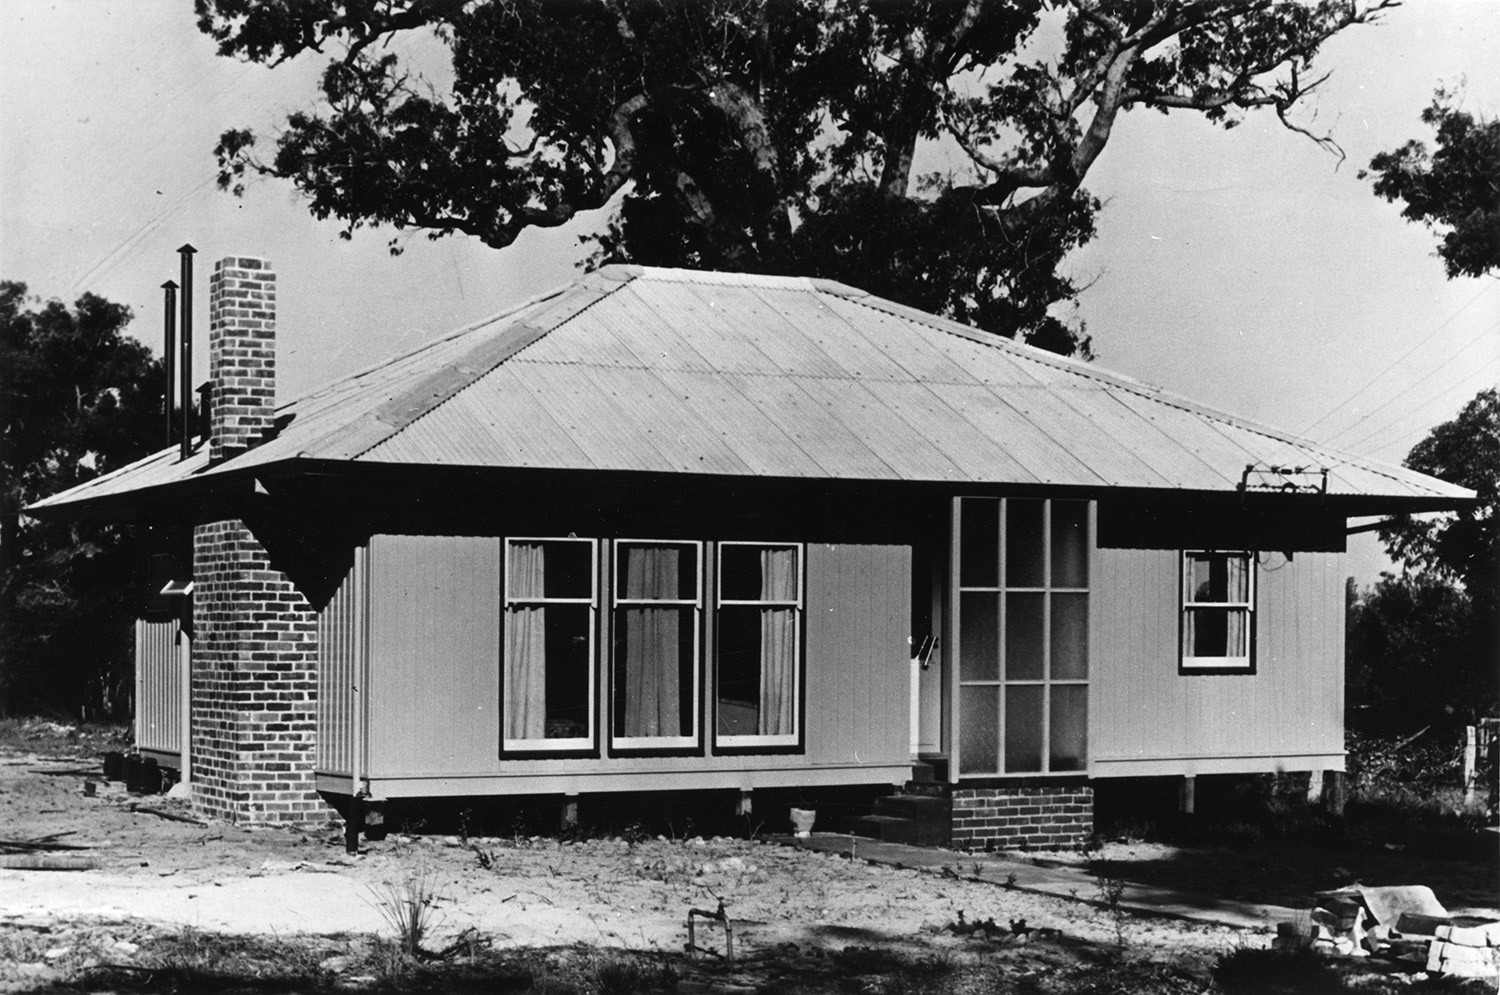 A black and white photo of a Puutalo Oy’s wooden house. The eaves of the house are long, the windows are relatively large and on the side wall there is a chimney. In the background is a large and winding tree.